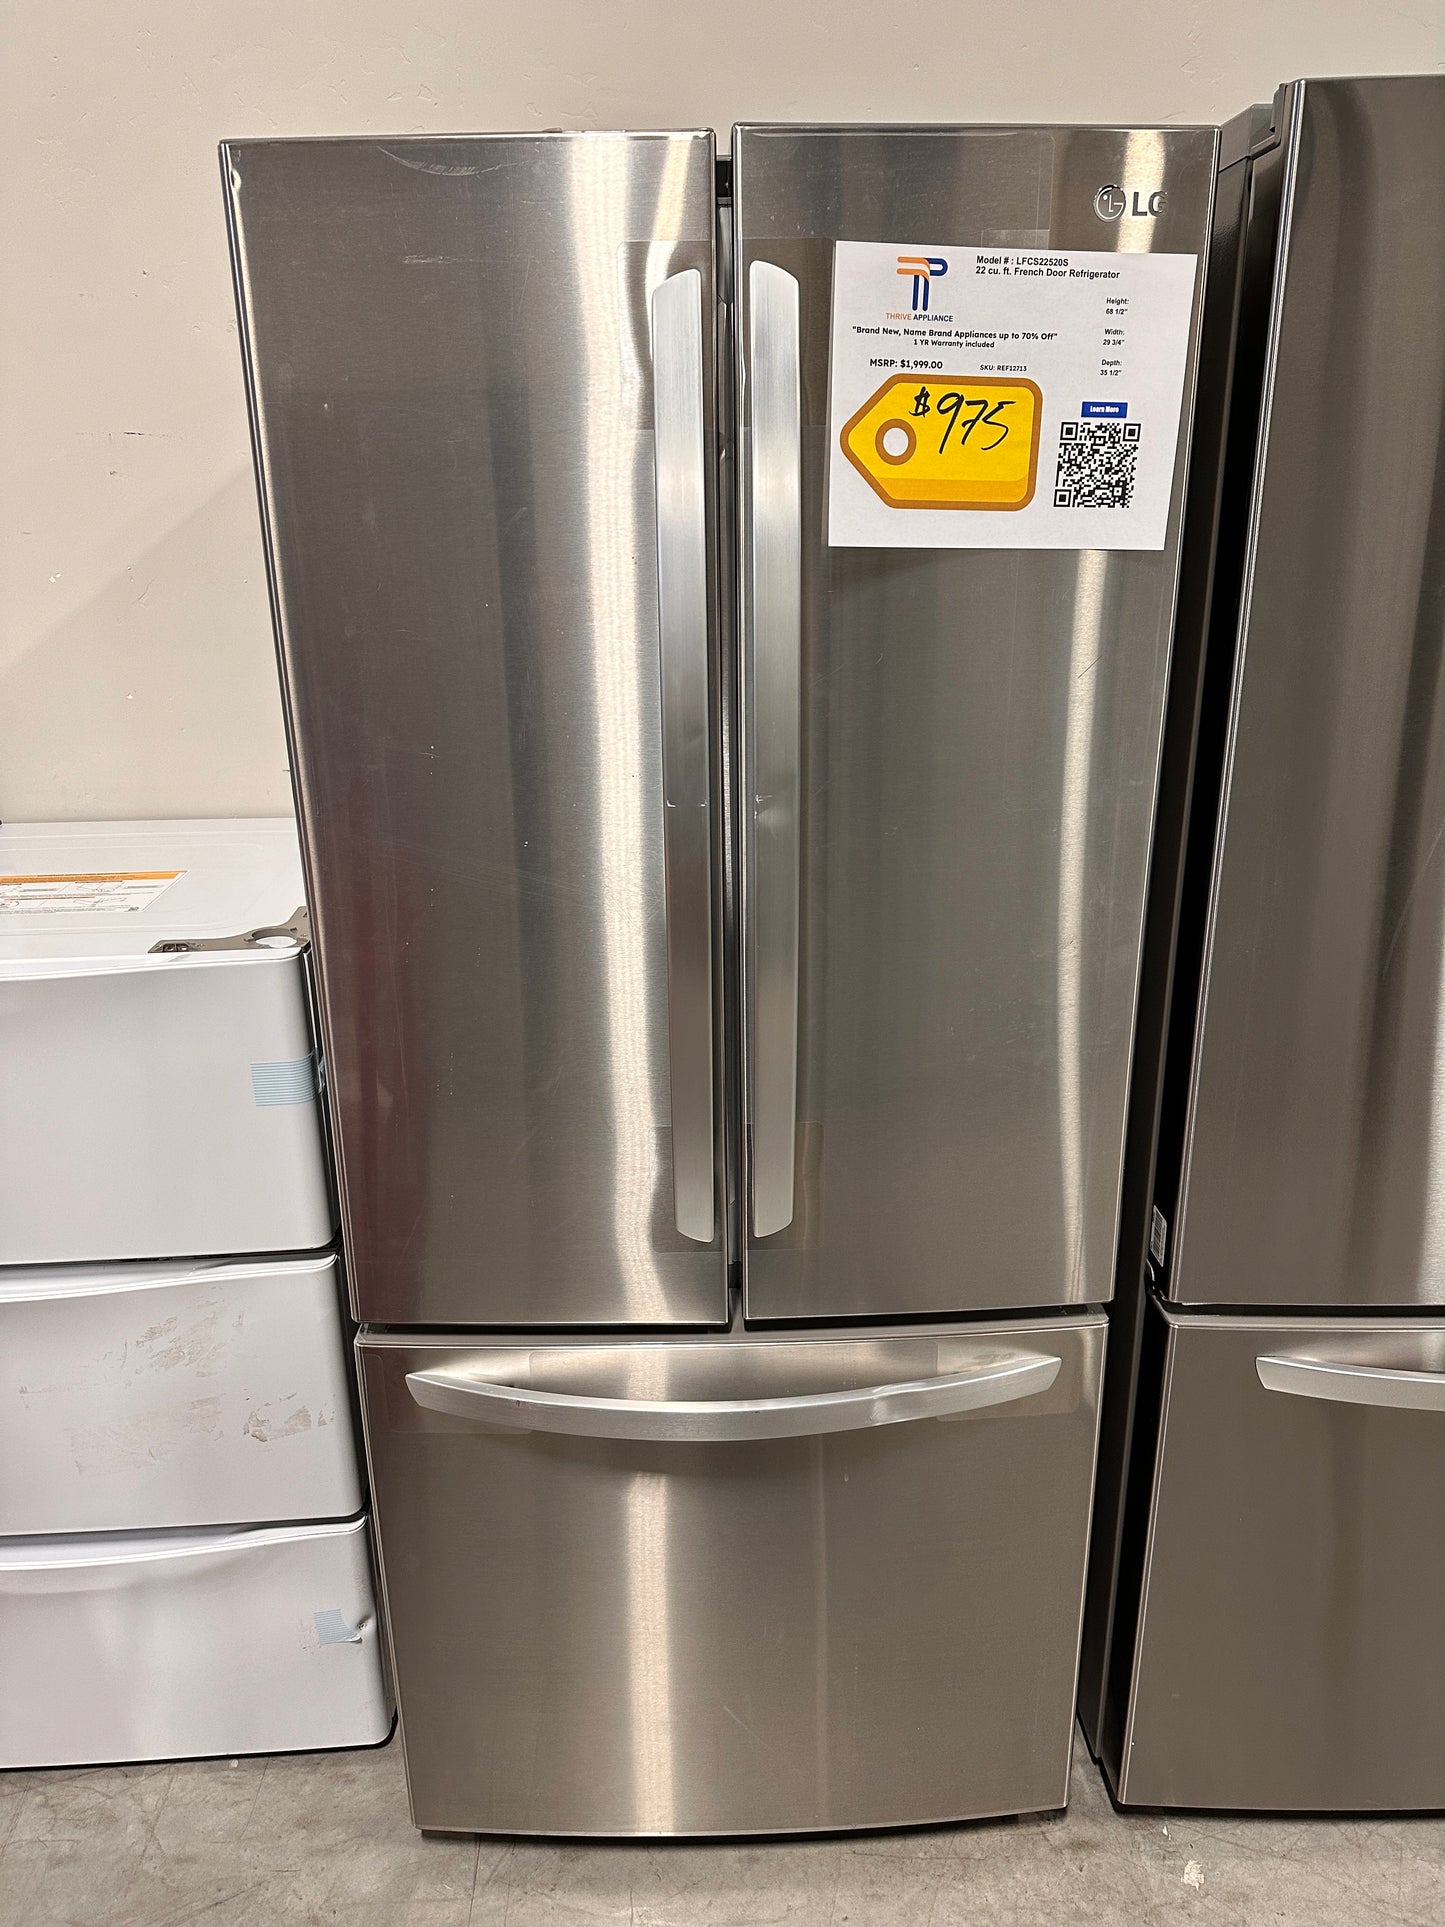 LG - 21.8 Cu. Ft. French Door Refrigerator - Stainless steel  Model:LFCS22520S  REF12713